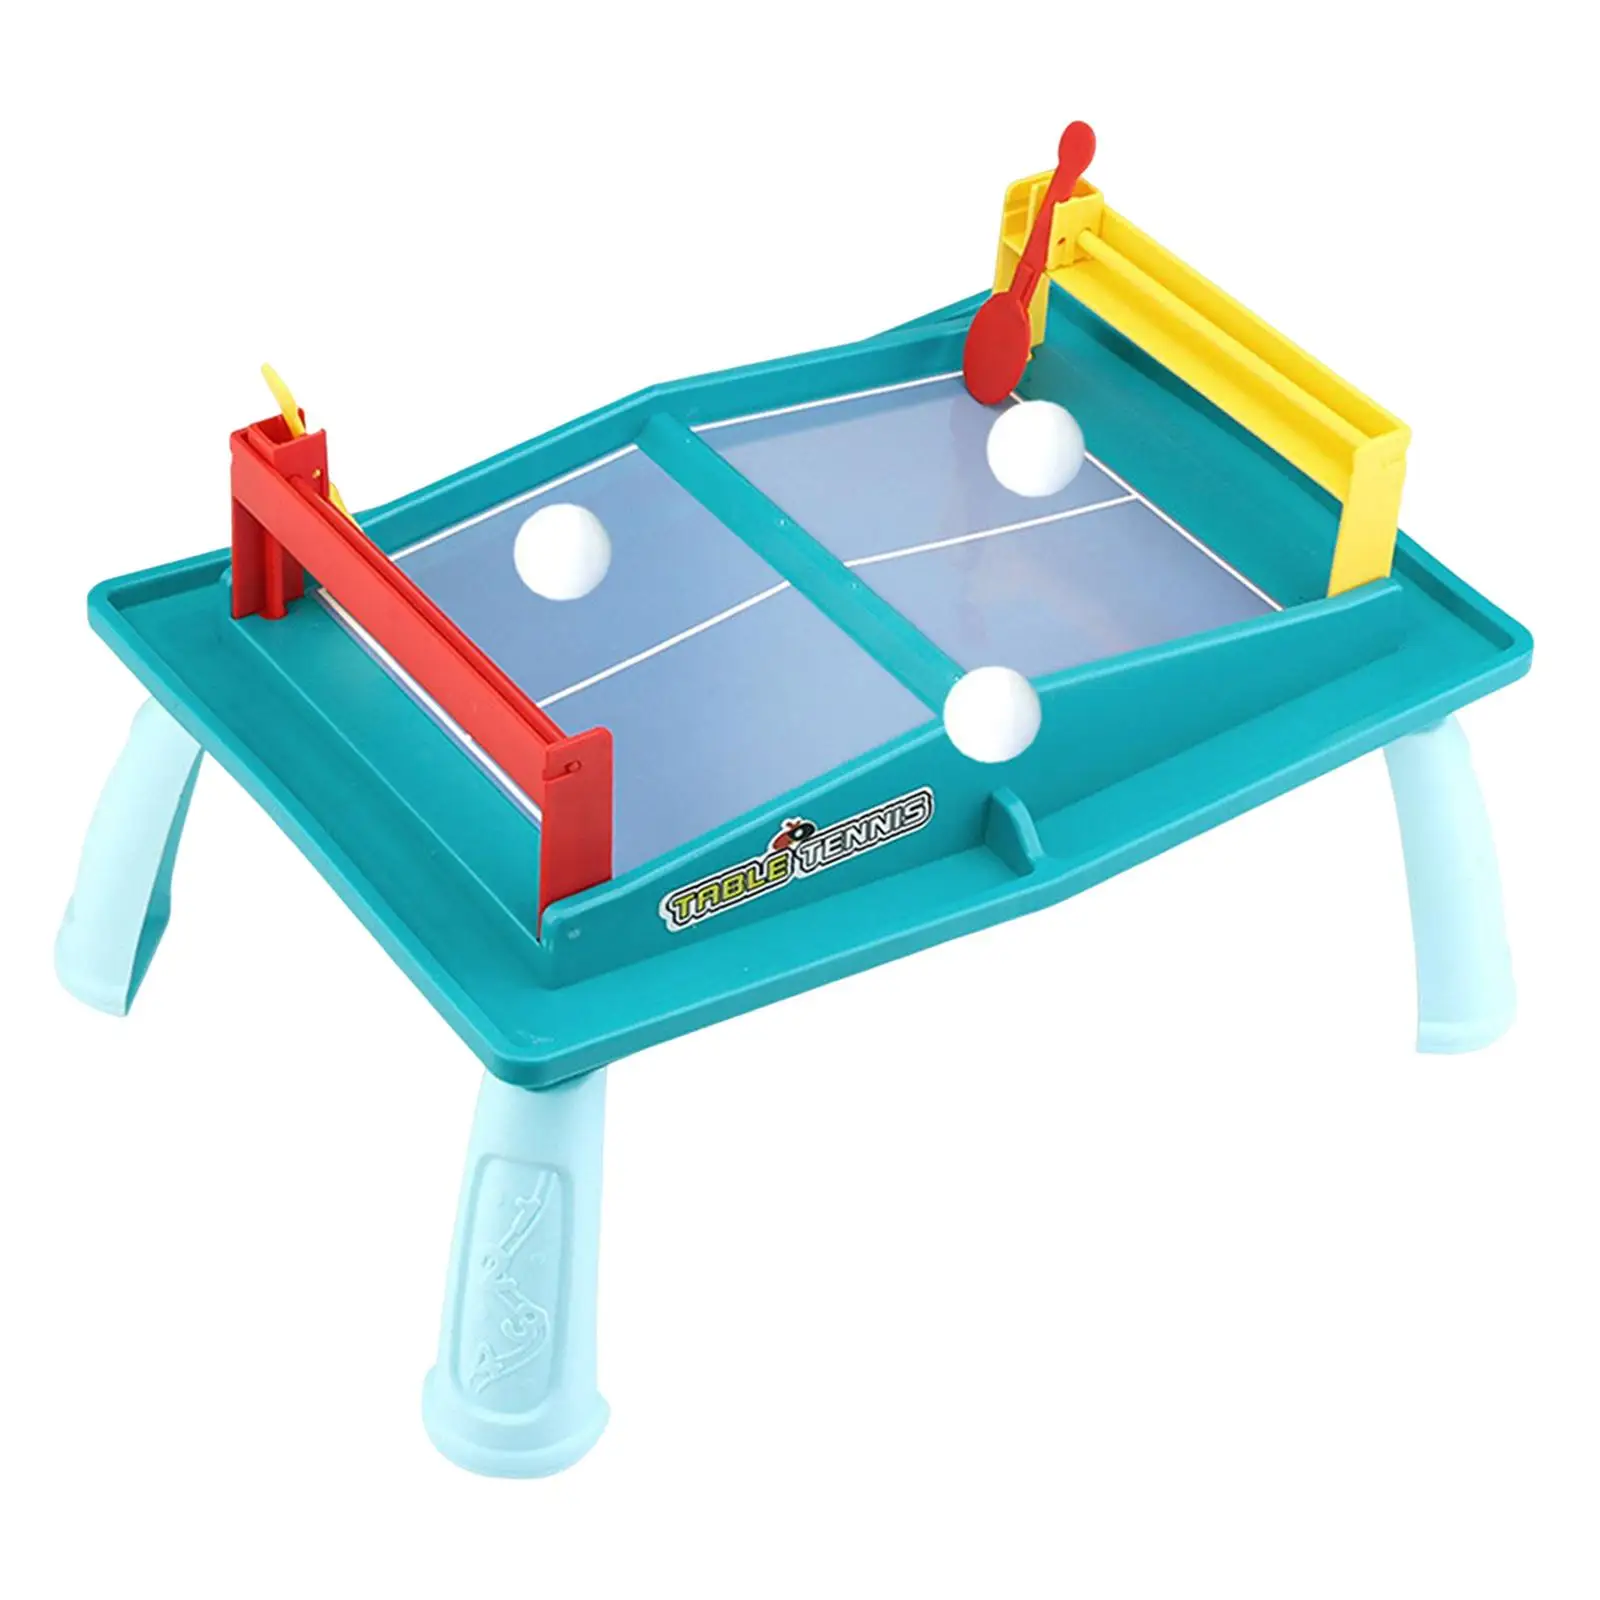 Kids Table Games Table Tennis Game Interaction Toy Removable Double Play Mini Table Tennis Toy for Gift Family Boys Girls Child